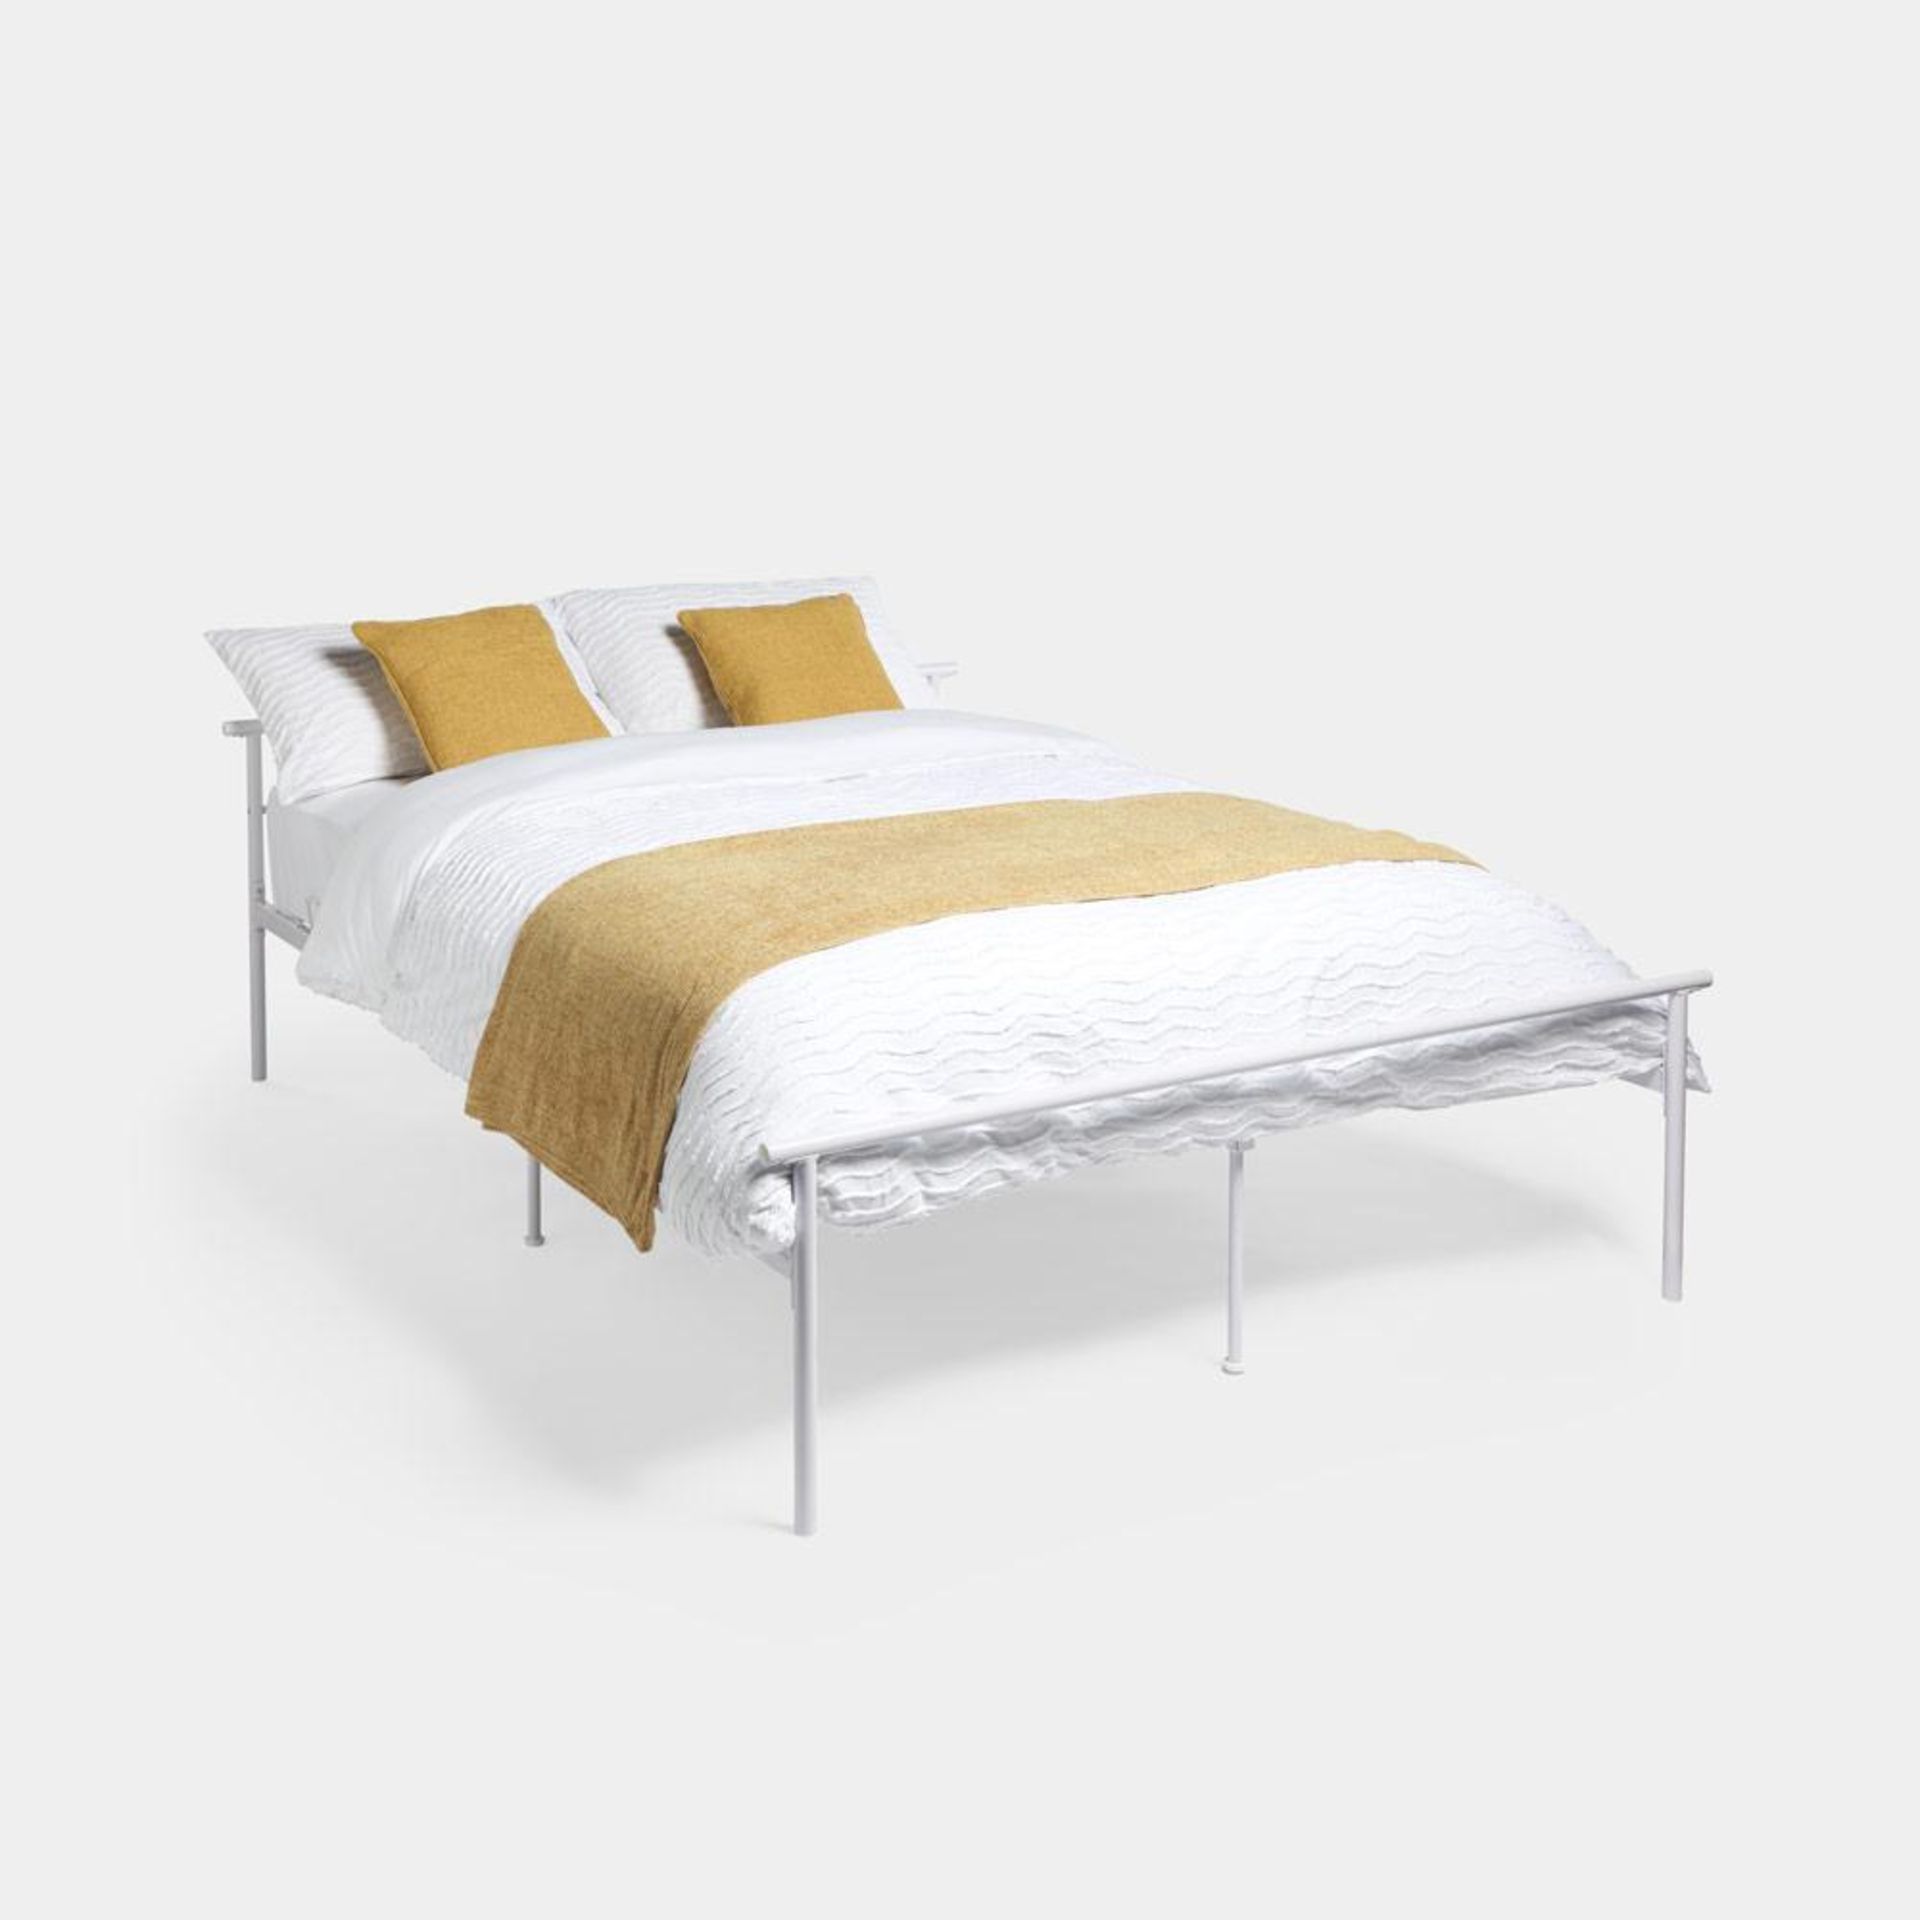 White King Size Metal Bed Frame - P4. Silver Compact King Metal BedWe spend a third of our lives